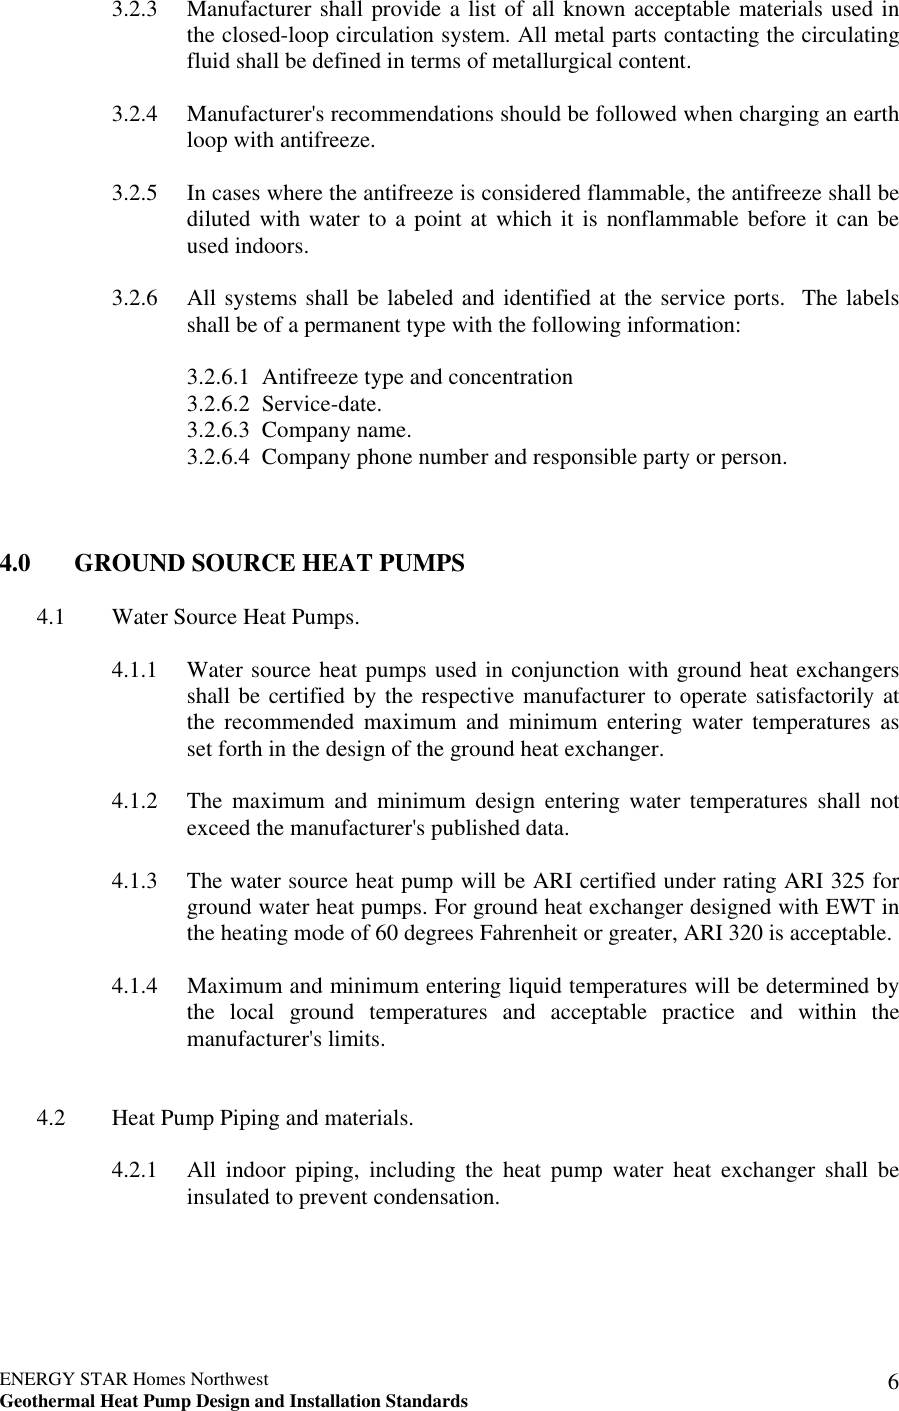 Page 8 of 9 - Energy-Tech-Laboratories Energy-Tech-Laboratories-Homes-Northwest-Users-Manual ESHNW GSHP Supplemental SPECS_04-20-05